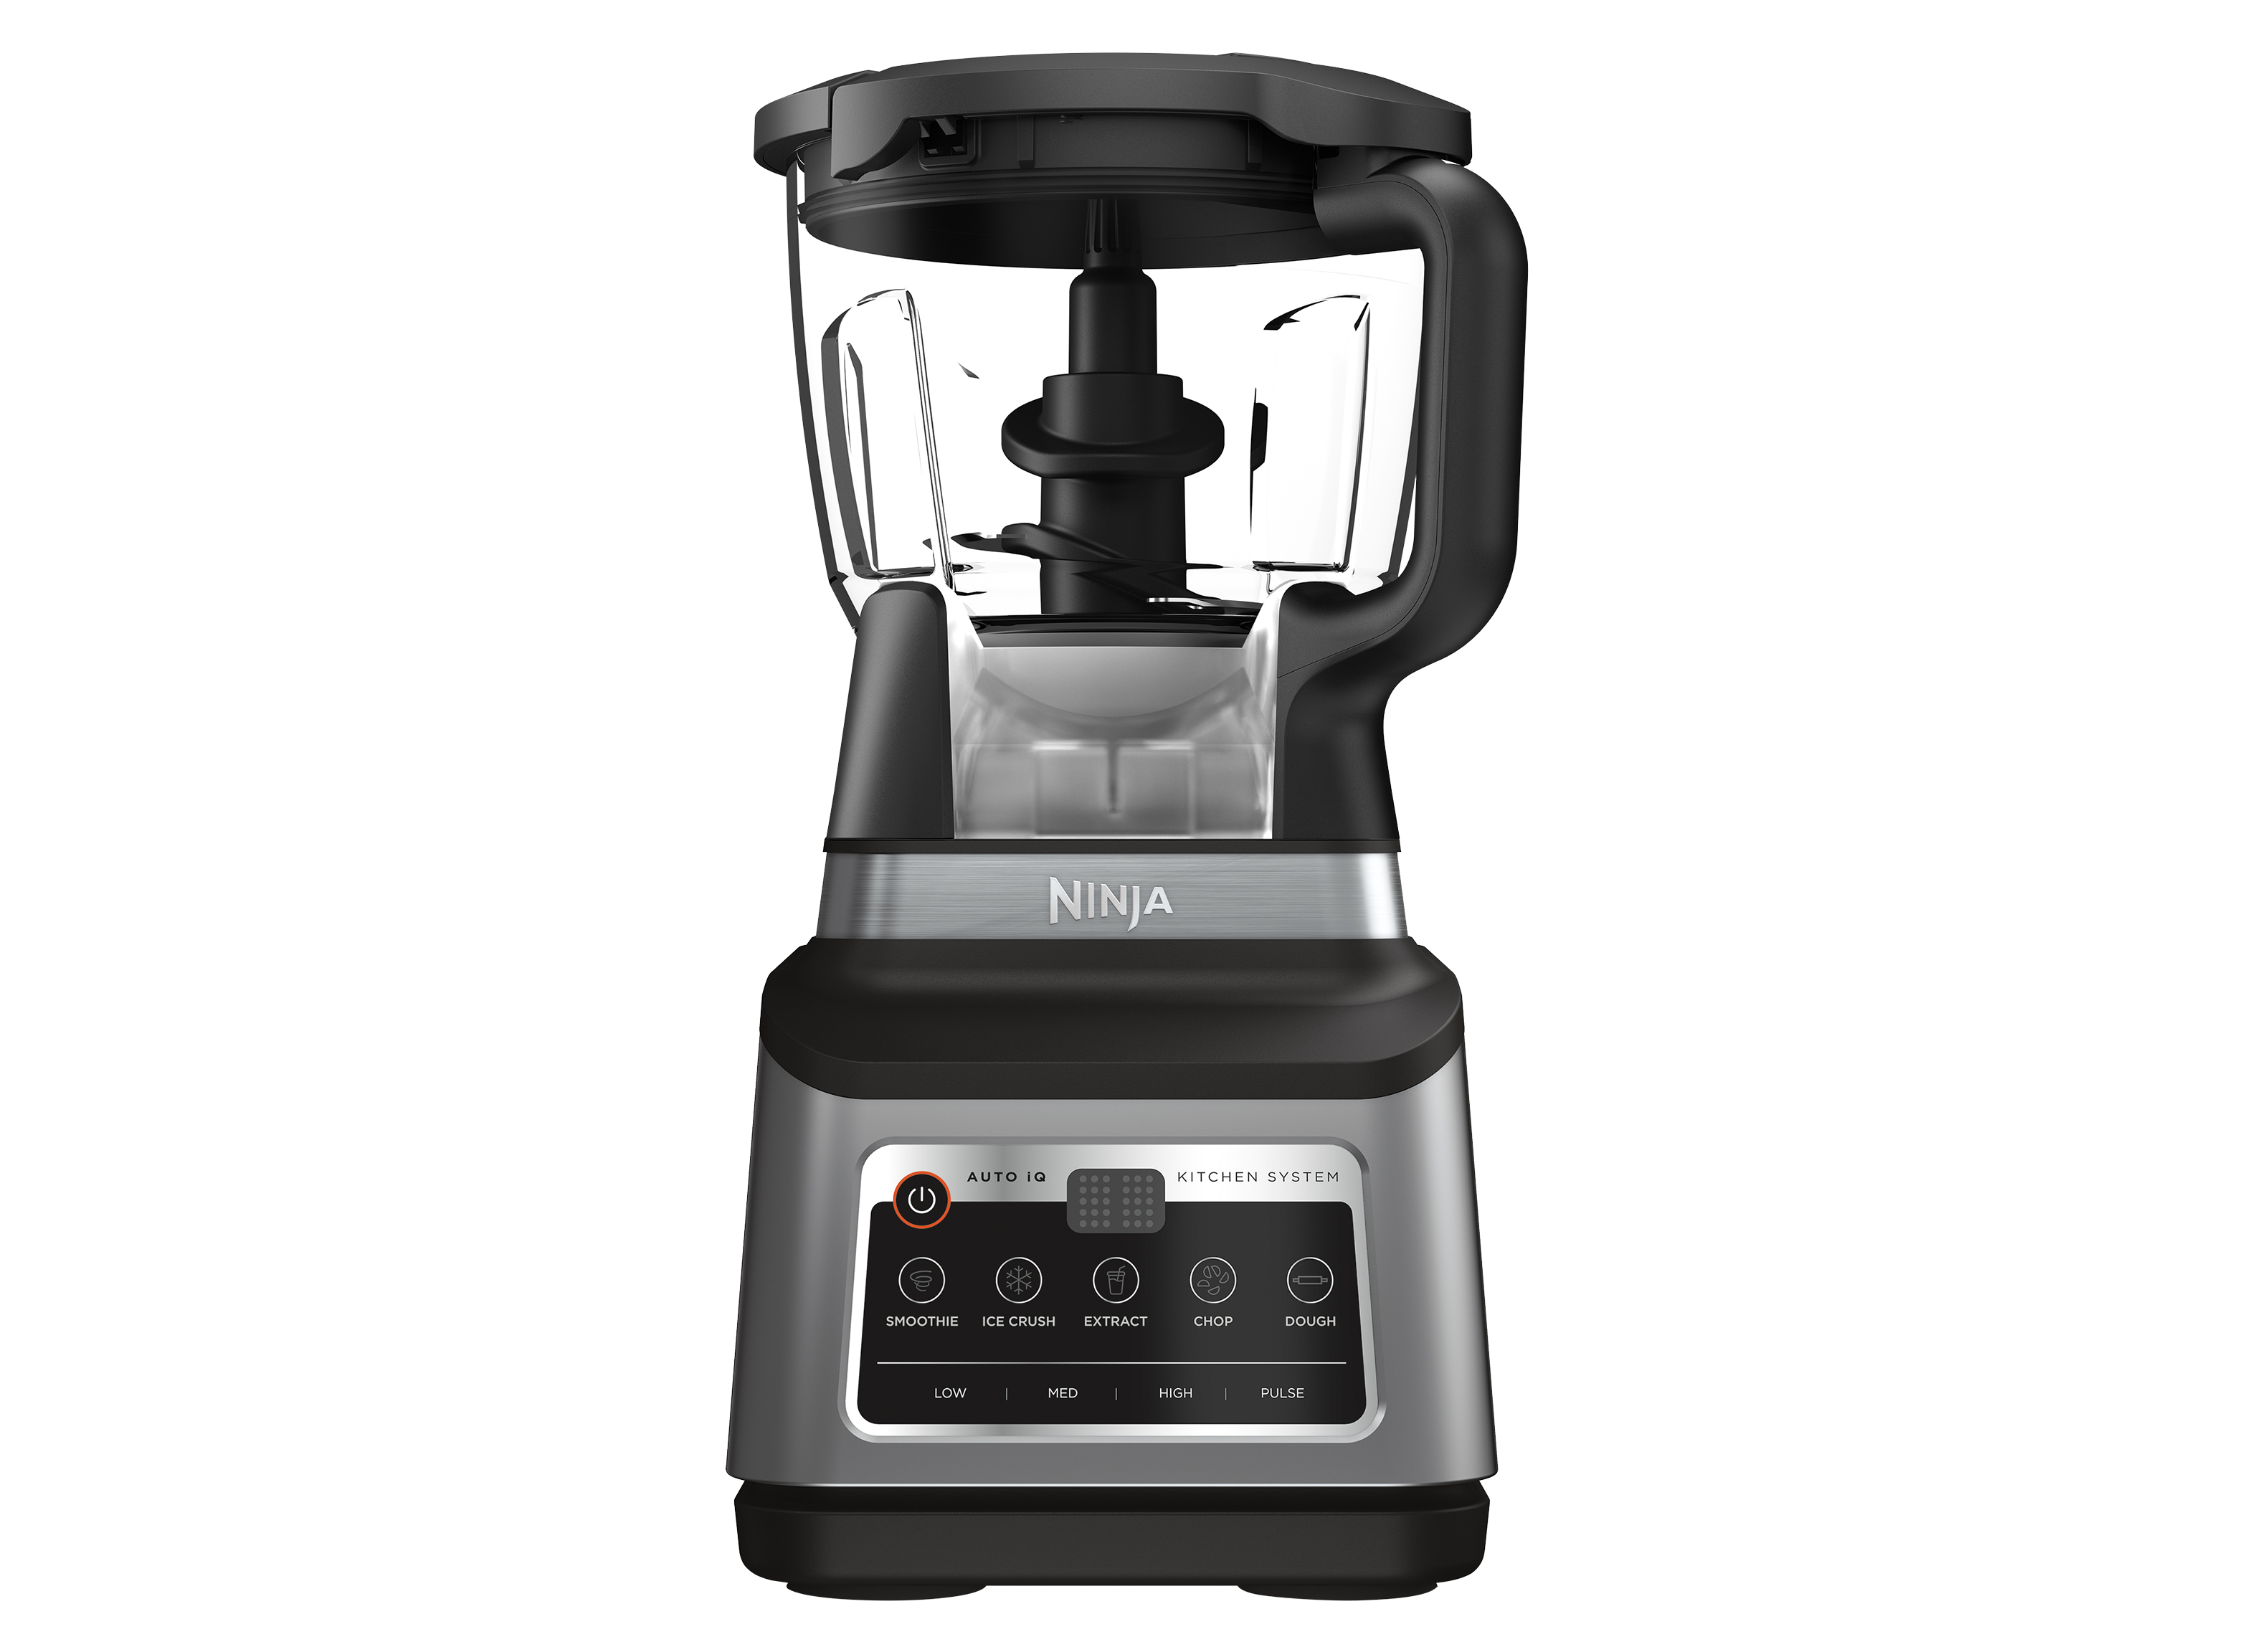 https://crdms.images.consumerreports.org/prod/products/cr/models/402536-food-choppers-ninja-bn801-professional-plus-kitchen-system-with-auto-iq-10017232.png